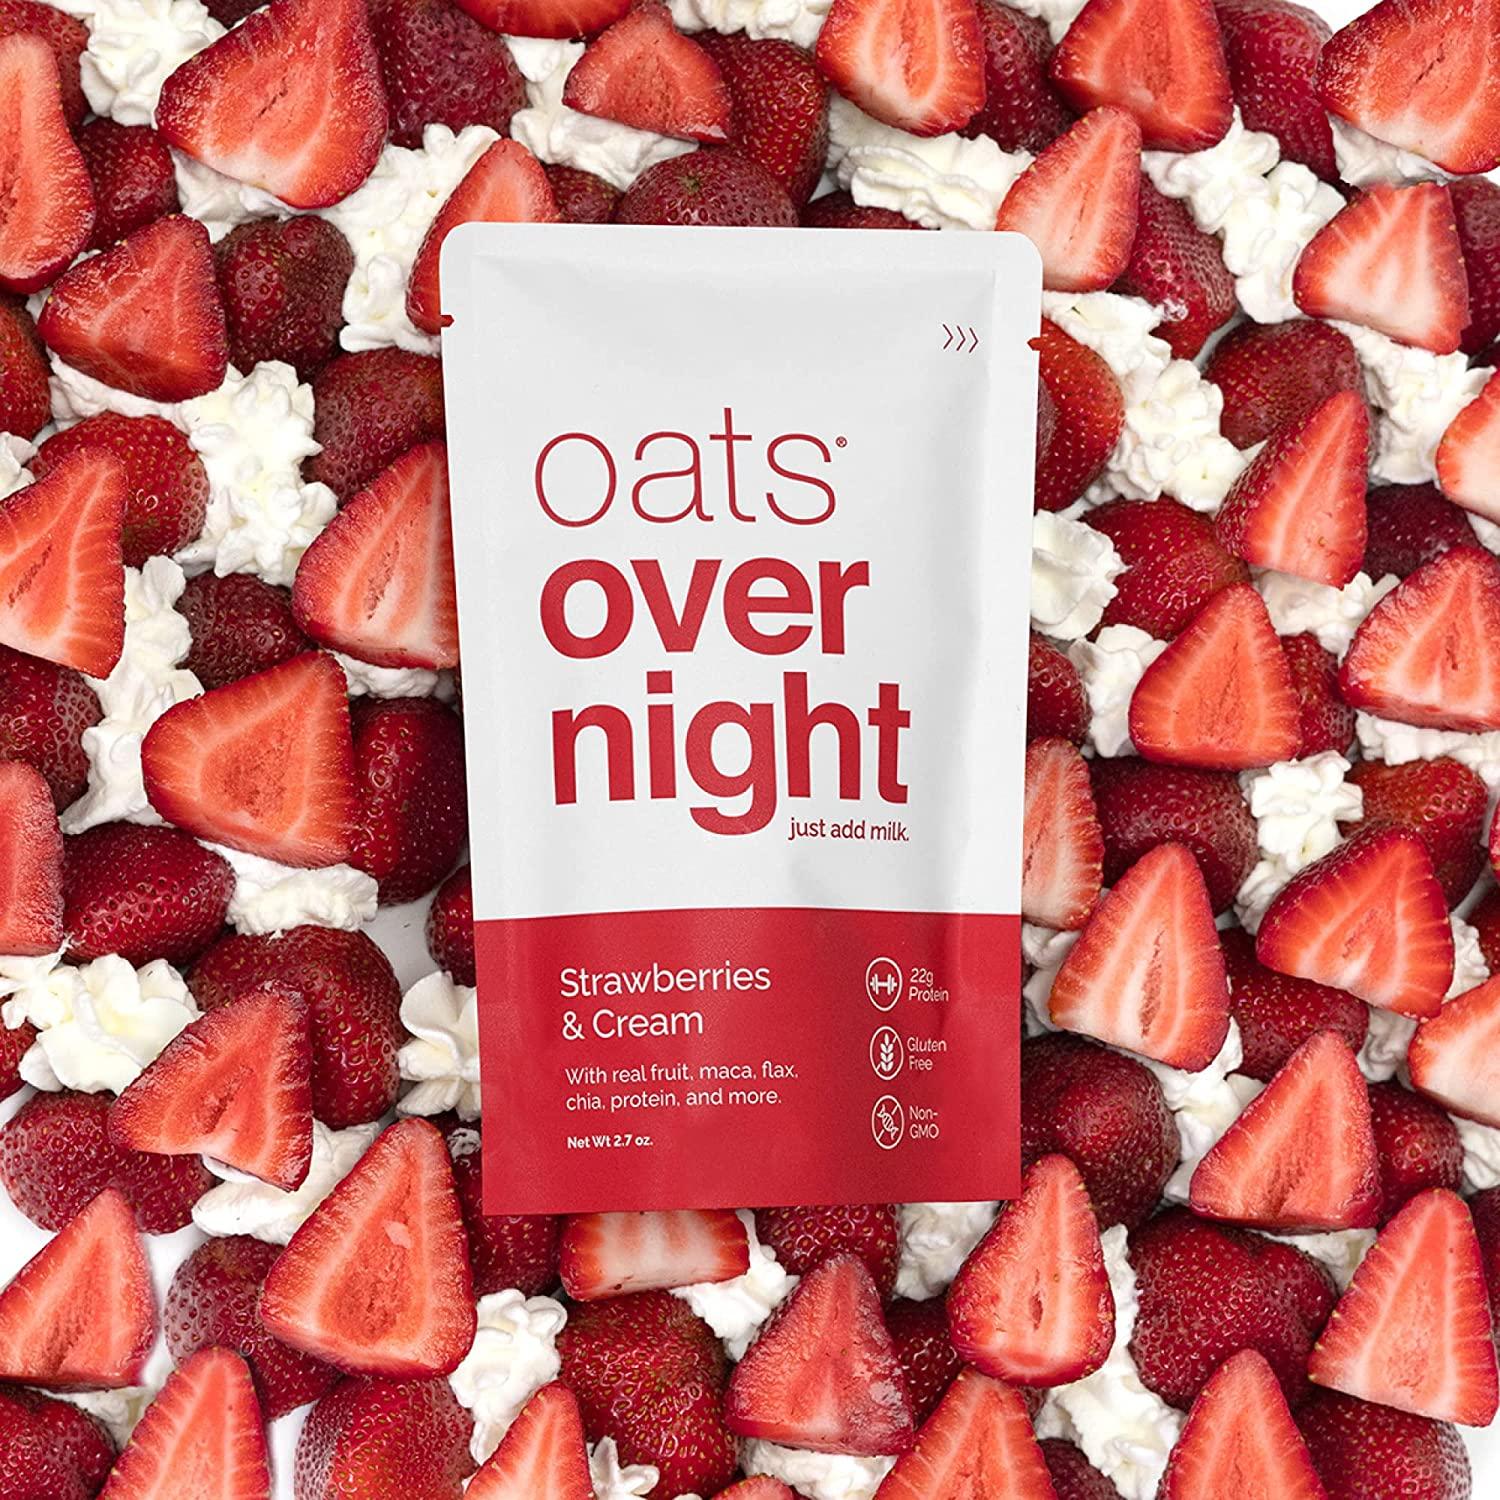 Oats Overnight - Party Pack Variety (8 Meals) High Protein Low Sugar  Breakfast Shake - Gluten Free Non GMO Oatmeal (2.7oz per meal)